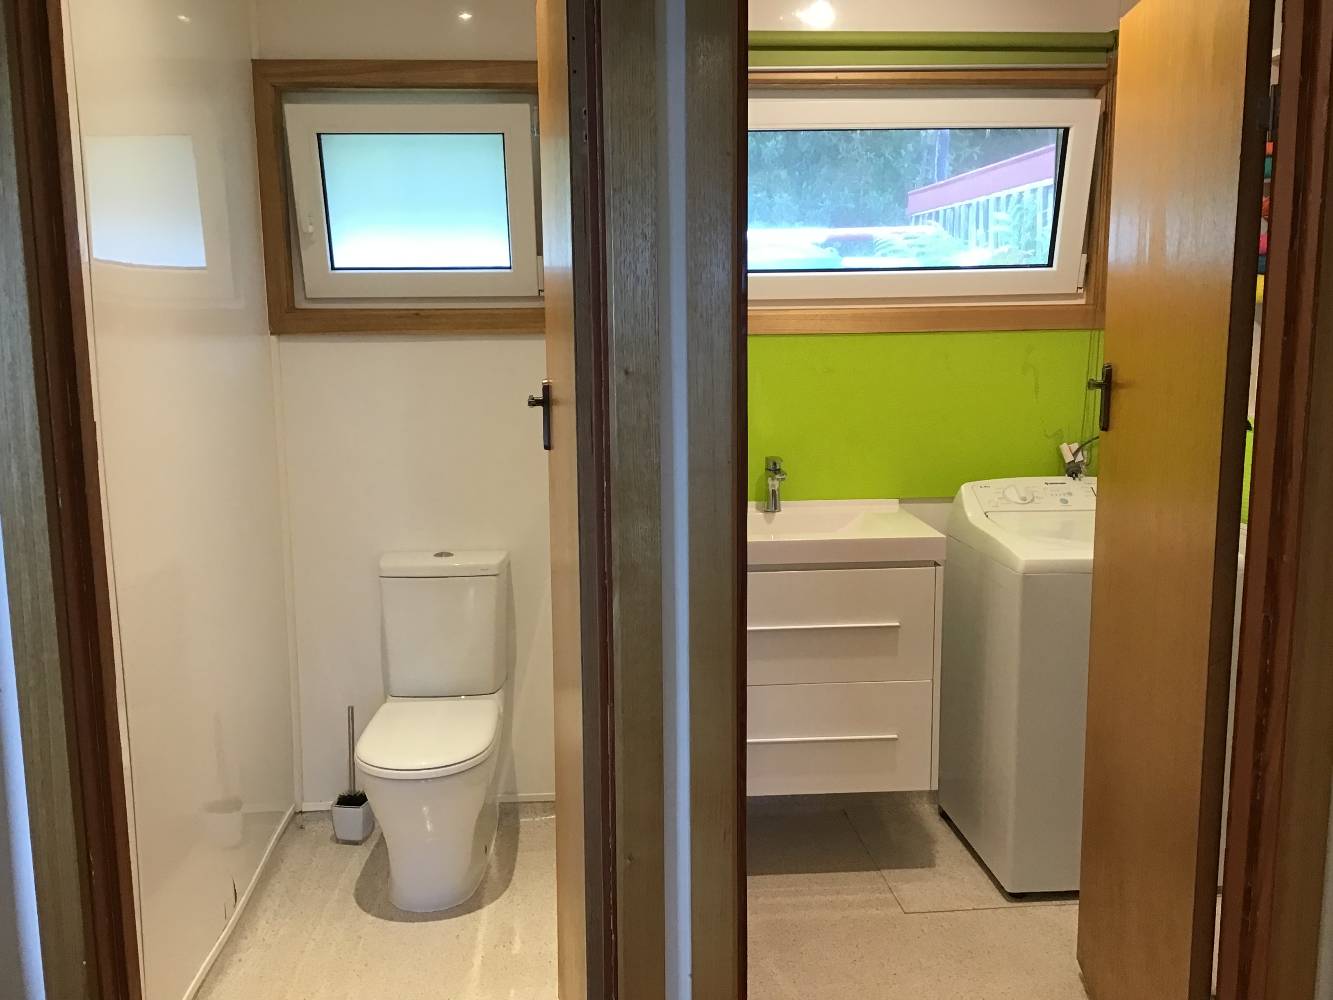 Bathroom and separate toilet.